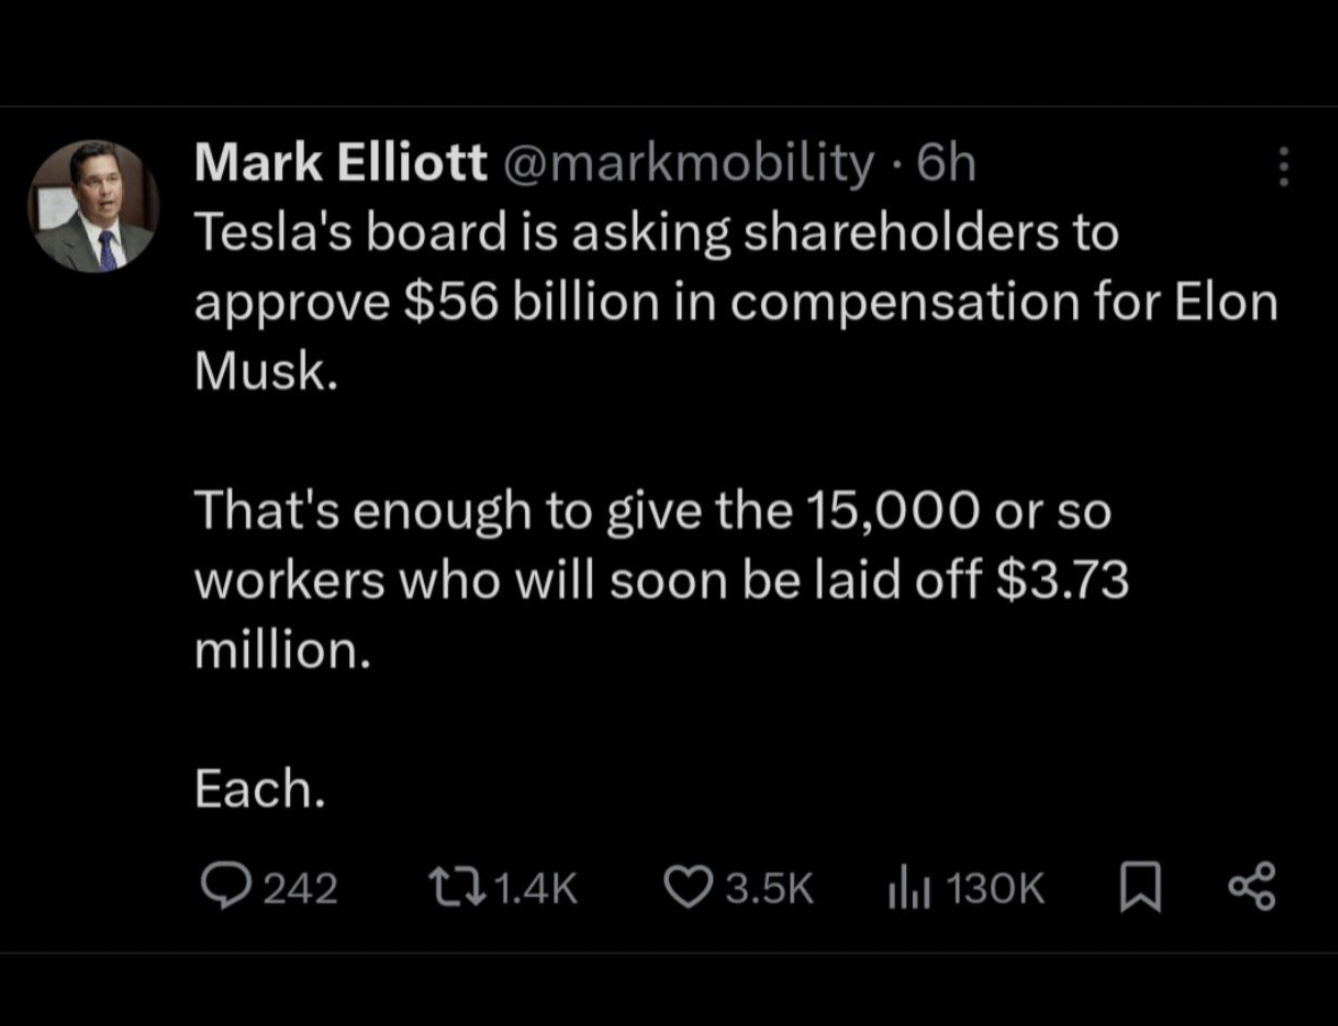 screenshot - Mark Elliott 6h Tesla's board is asking holders to approve $56 billion in compensation for Elon Musk. That's enough to give the 15,000 or so workers who will soon be laid off $3.73 million. Each. 242 ili